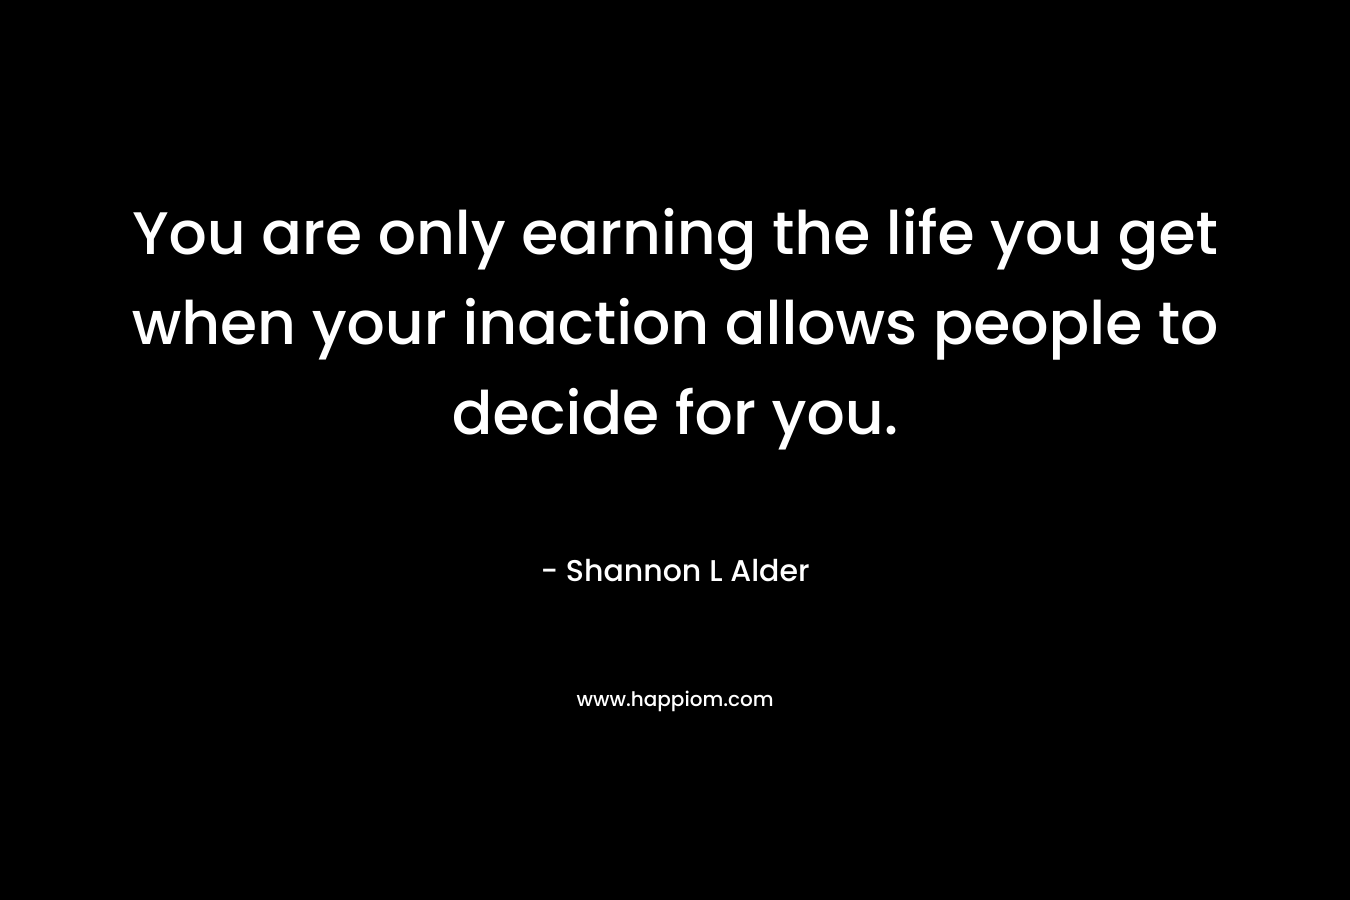 You are only earning the life you get when your inaction allows people to decide for you.